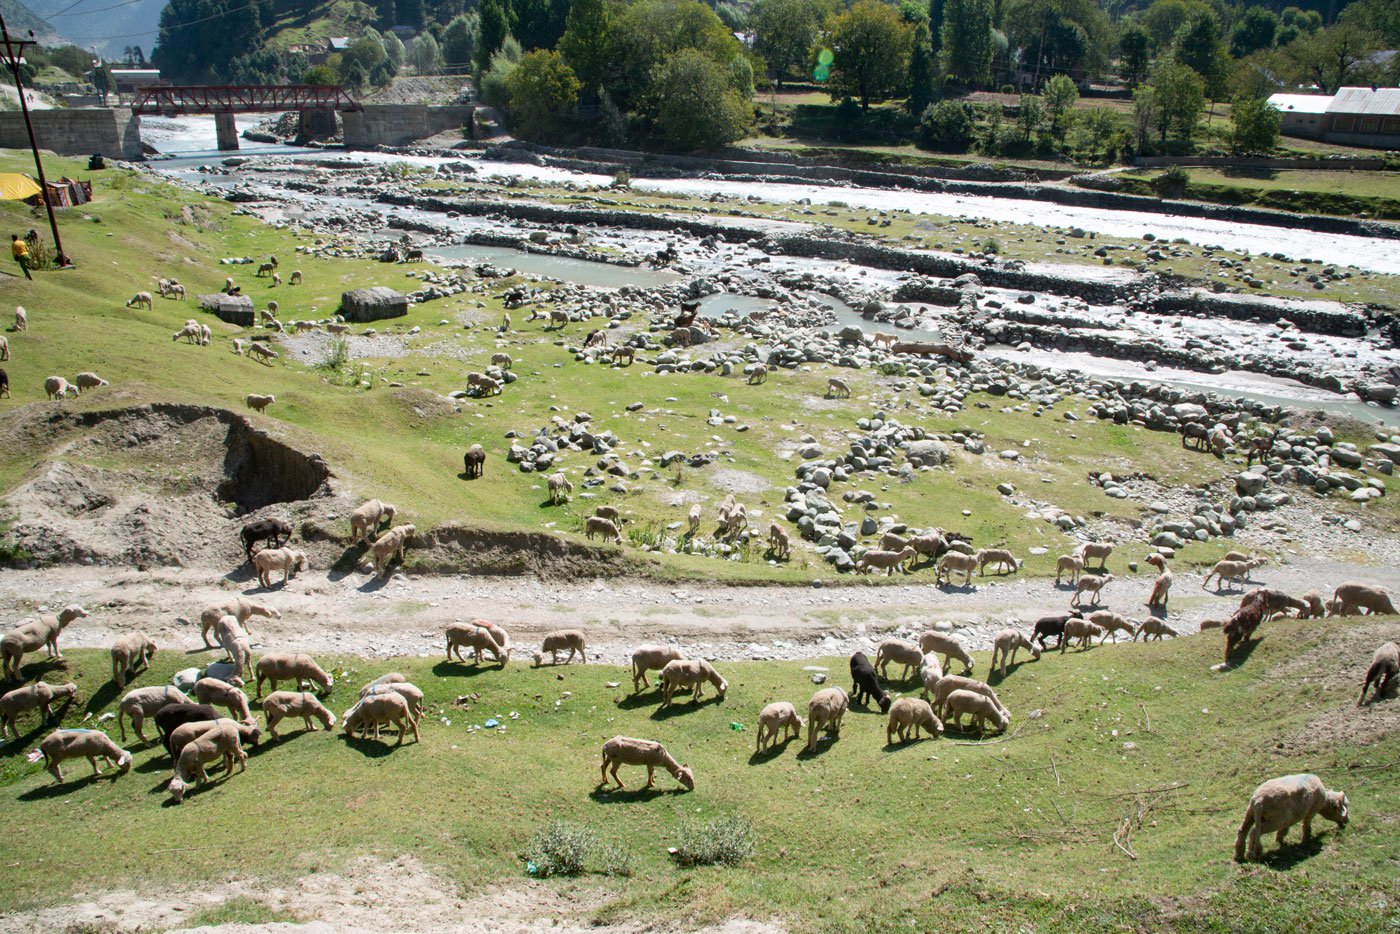 A flock of sheep grazing next to the Indus river. The Bakarwals move in large groups with their animals across the Himalayas in search of grazing grounds